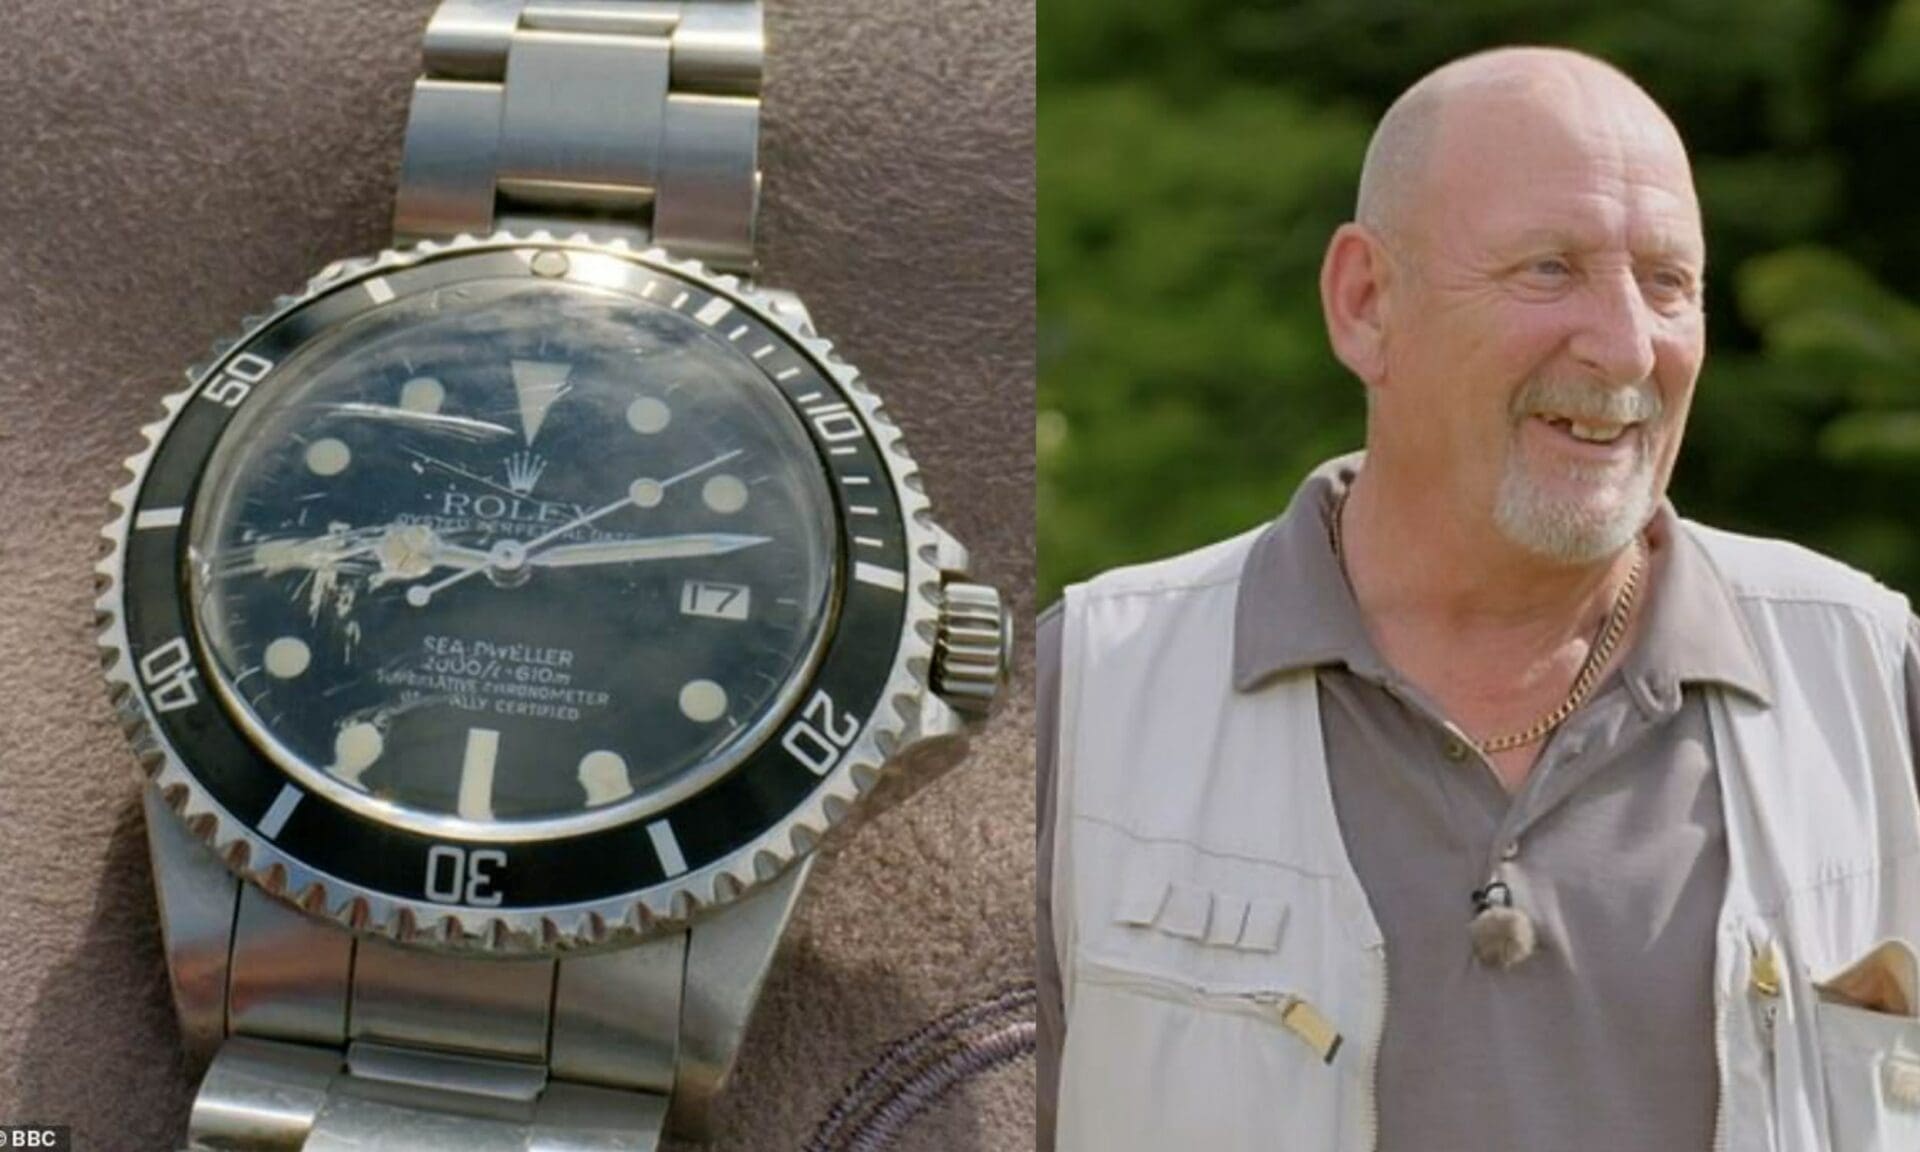 Rolex Sea-Dweller badly scratched in a cycling accident gets shock valuation on the Antiques Roadshow